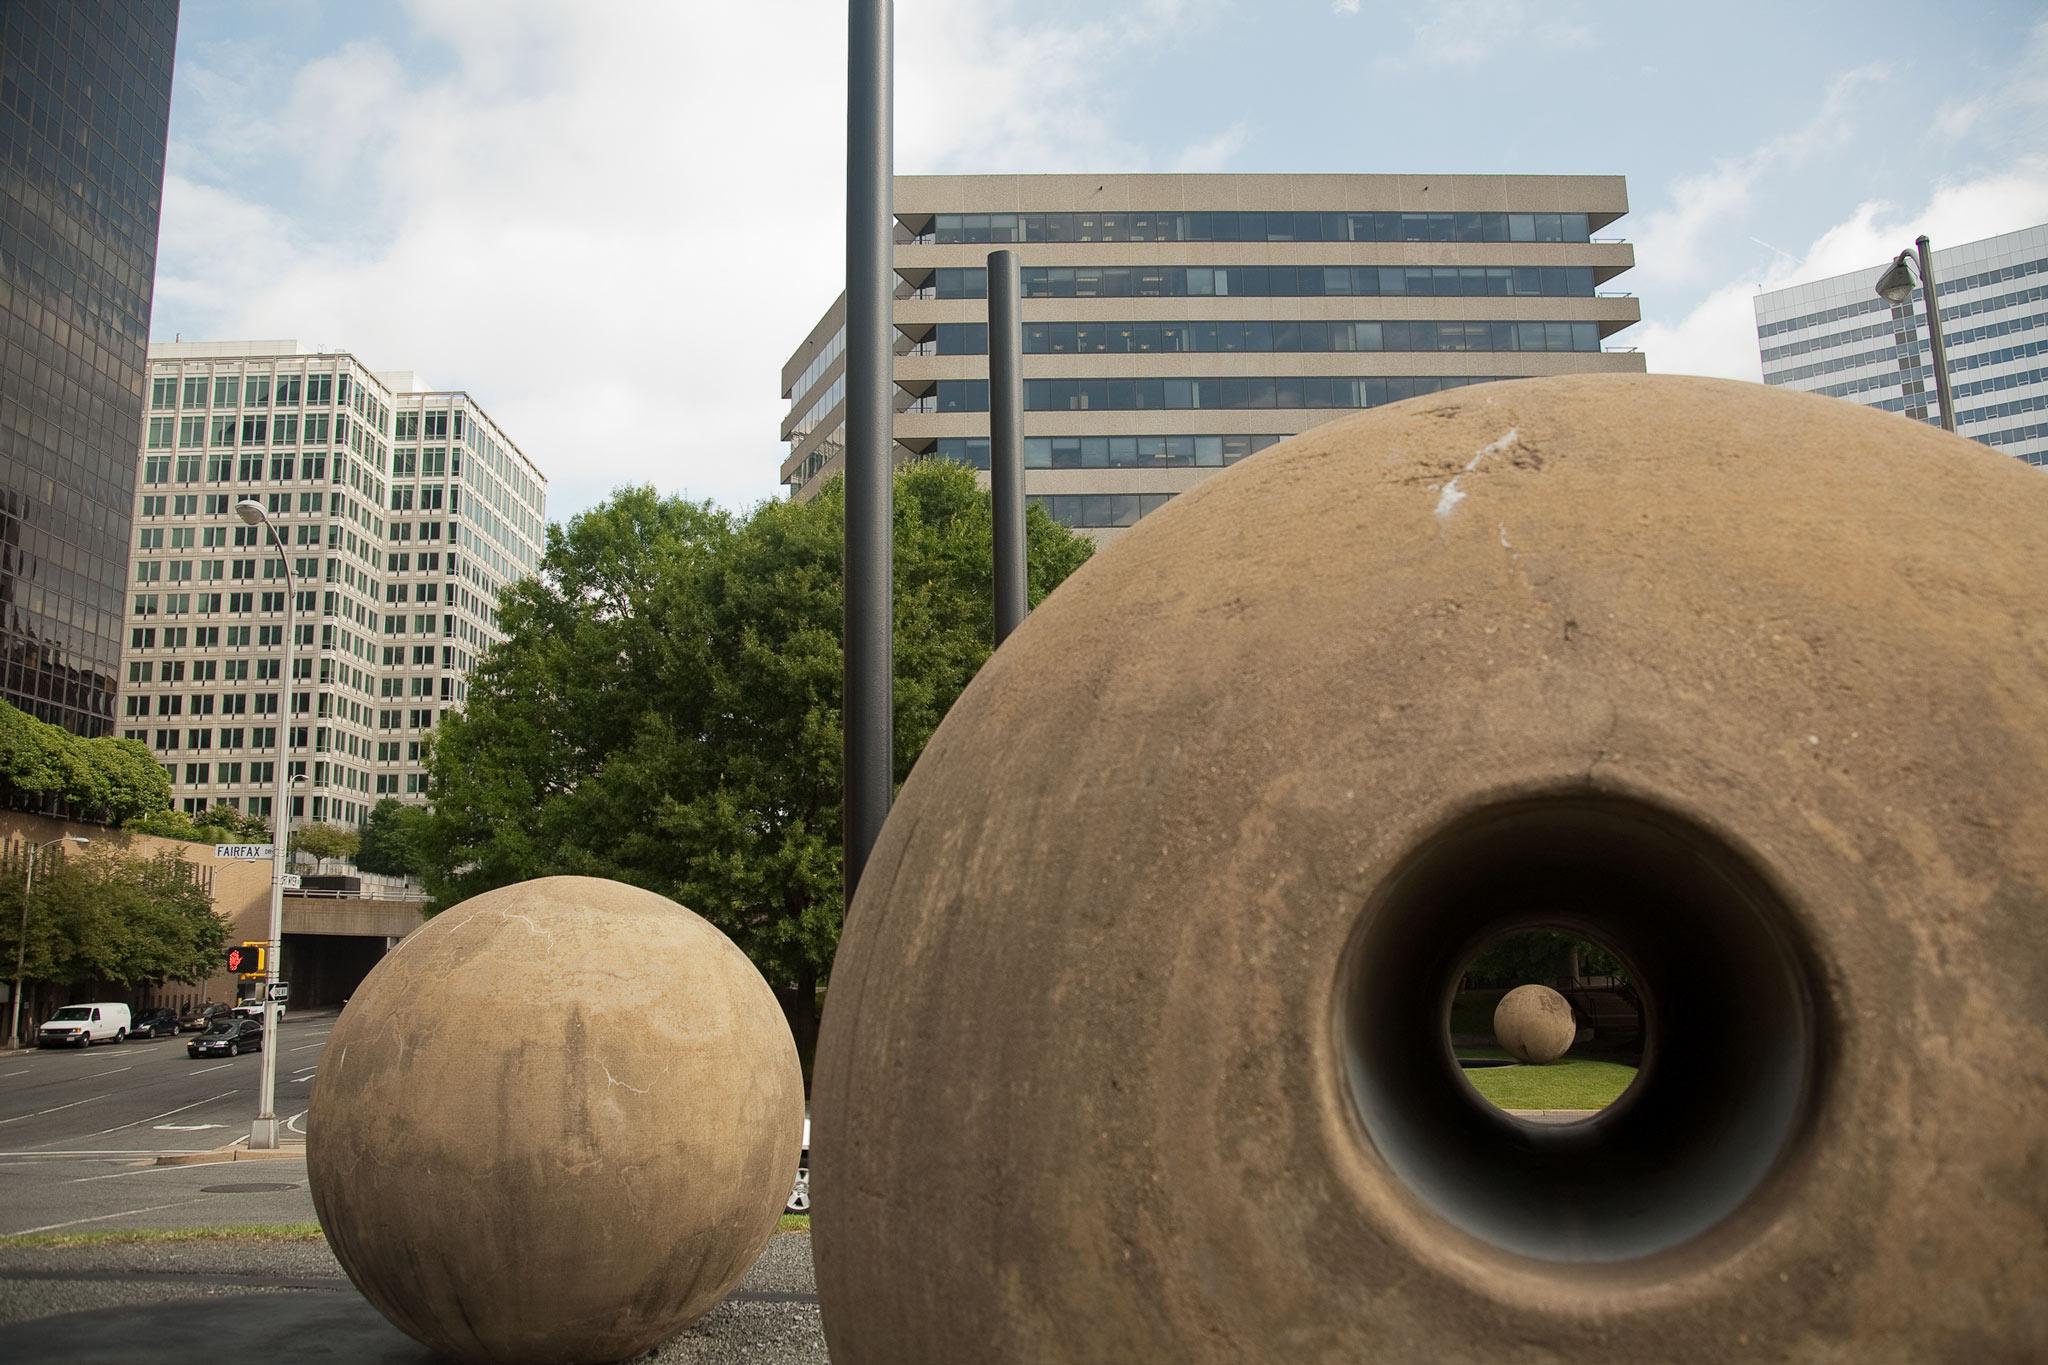 a large concrete sphere with a circular tunnel through the center that perfectly frames another concrete sphere in the distance. tall buildings in background